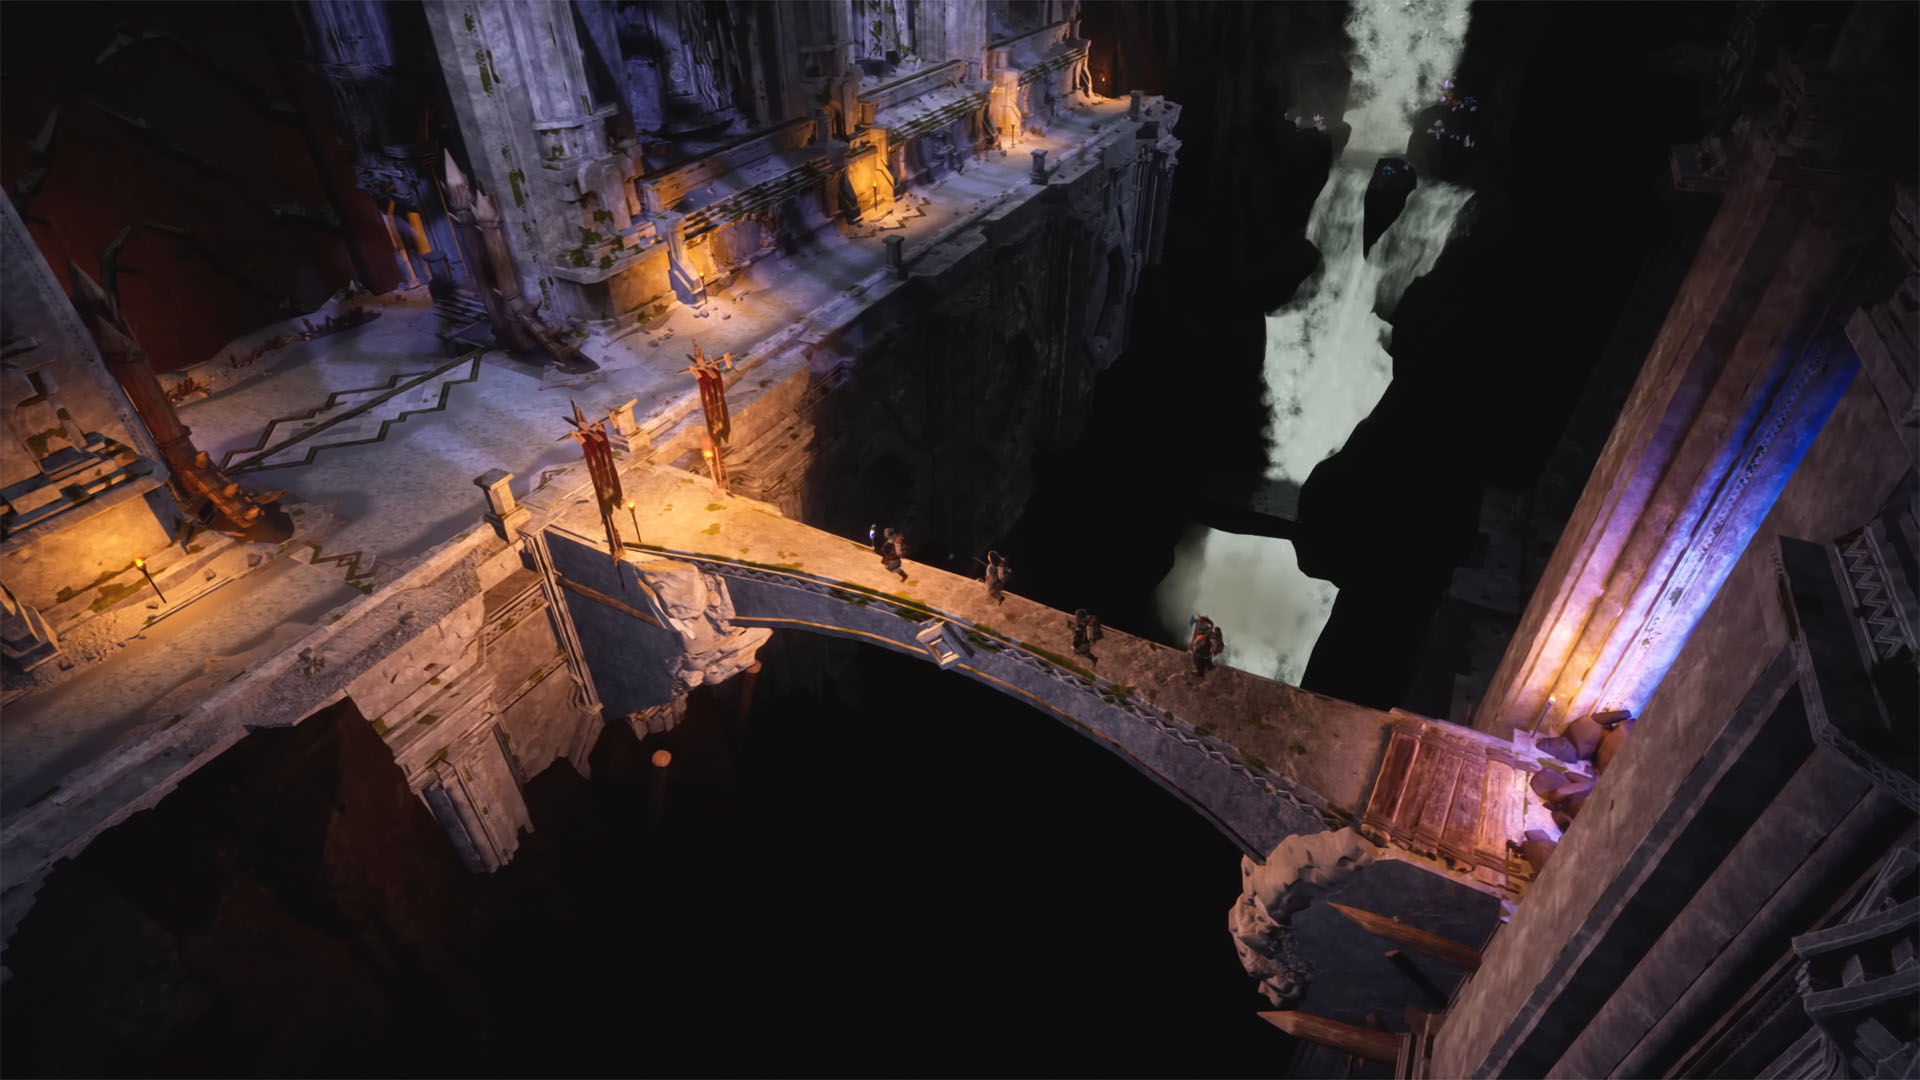 The Lord of the Rings: Return to Moria Announced for Fall 2023